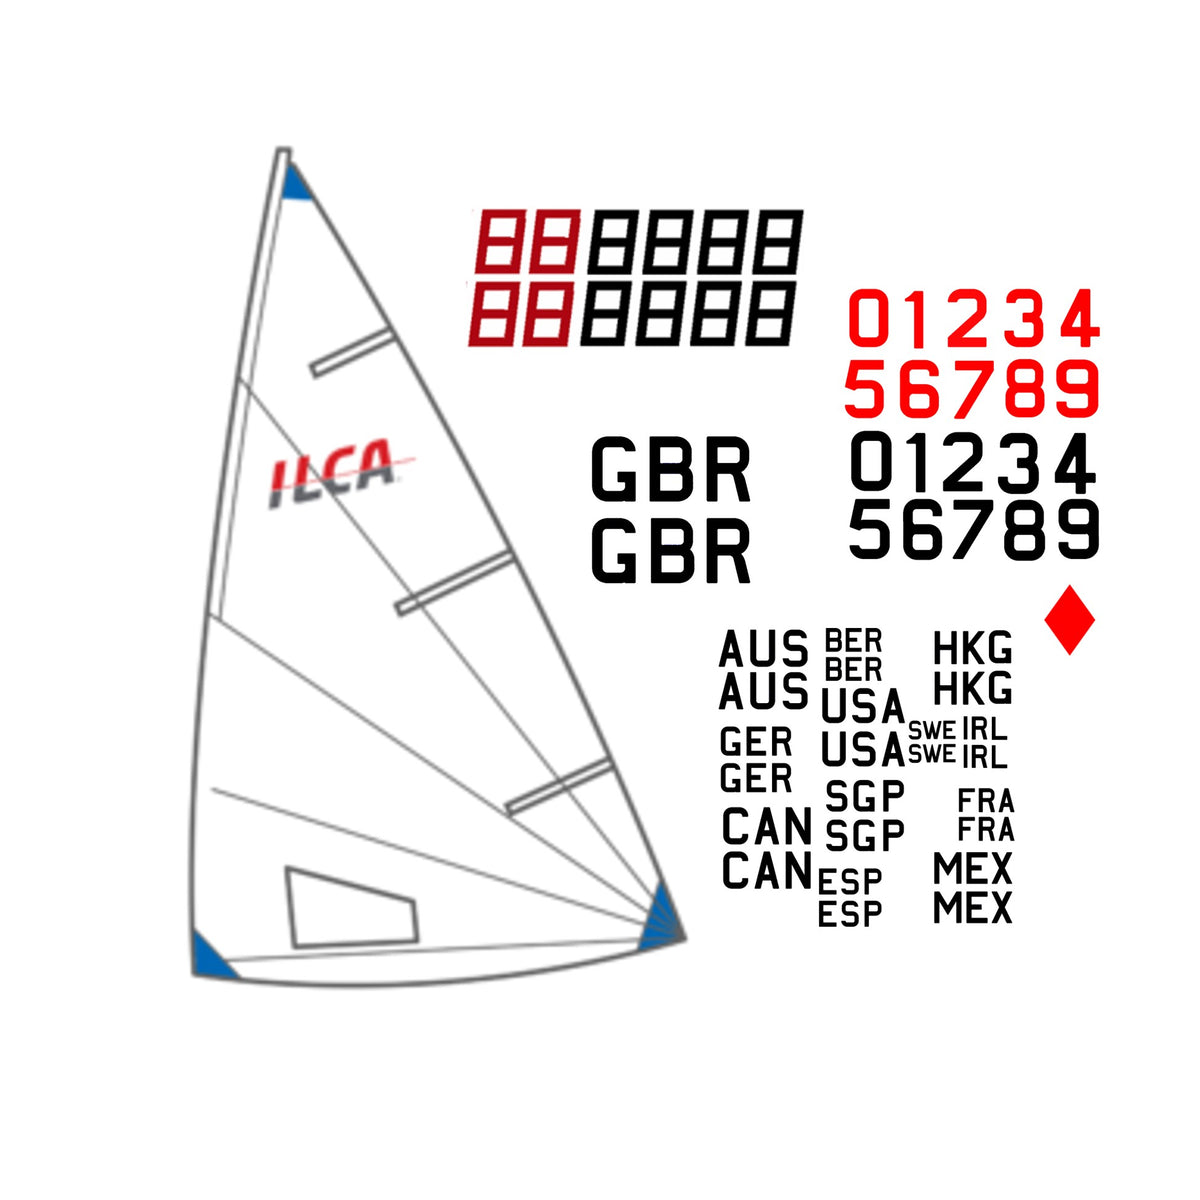 ILCA 6 Sail Bundle - Sail, Numbers and Country Codes